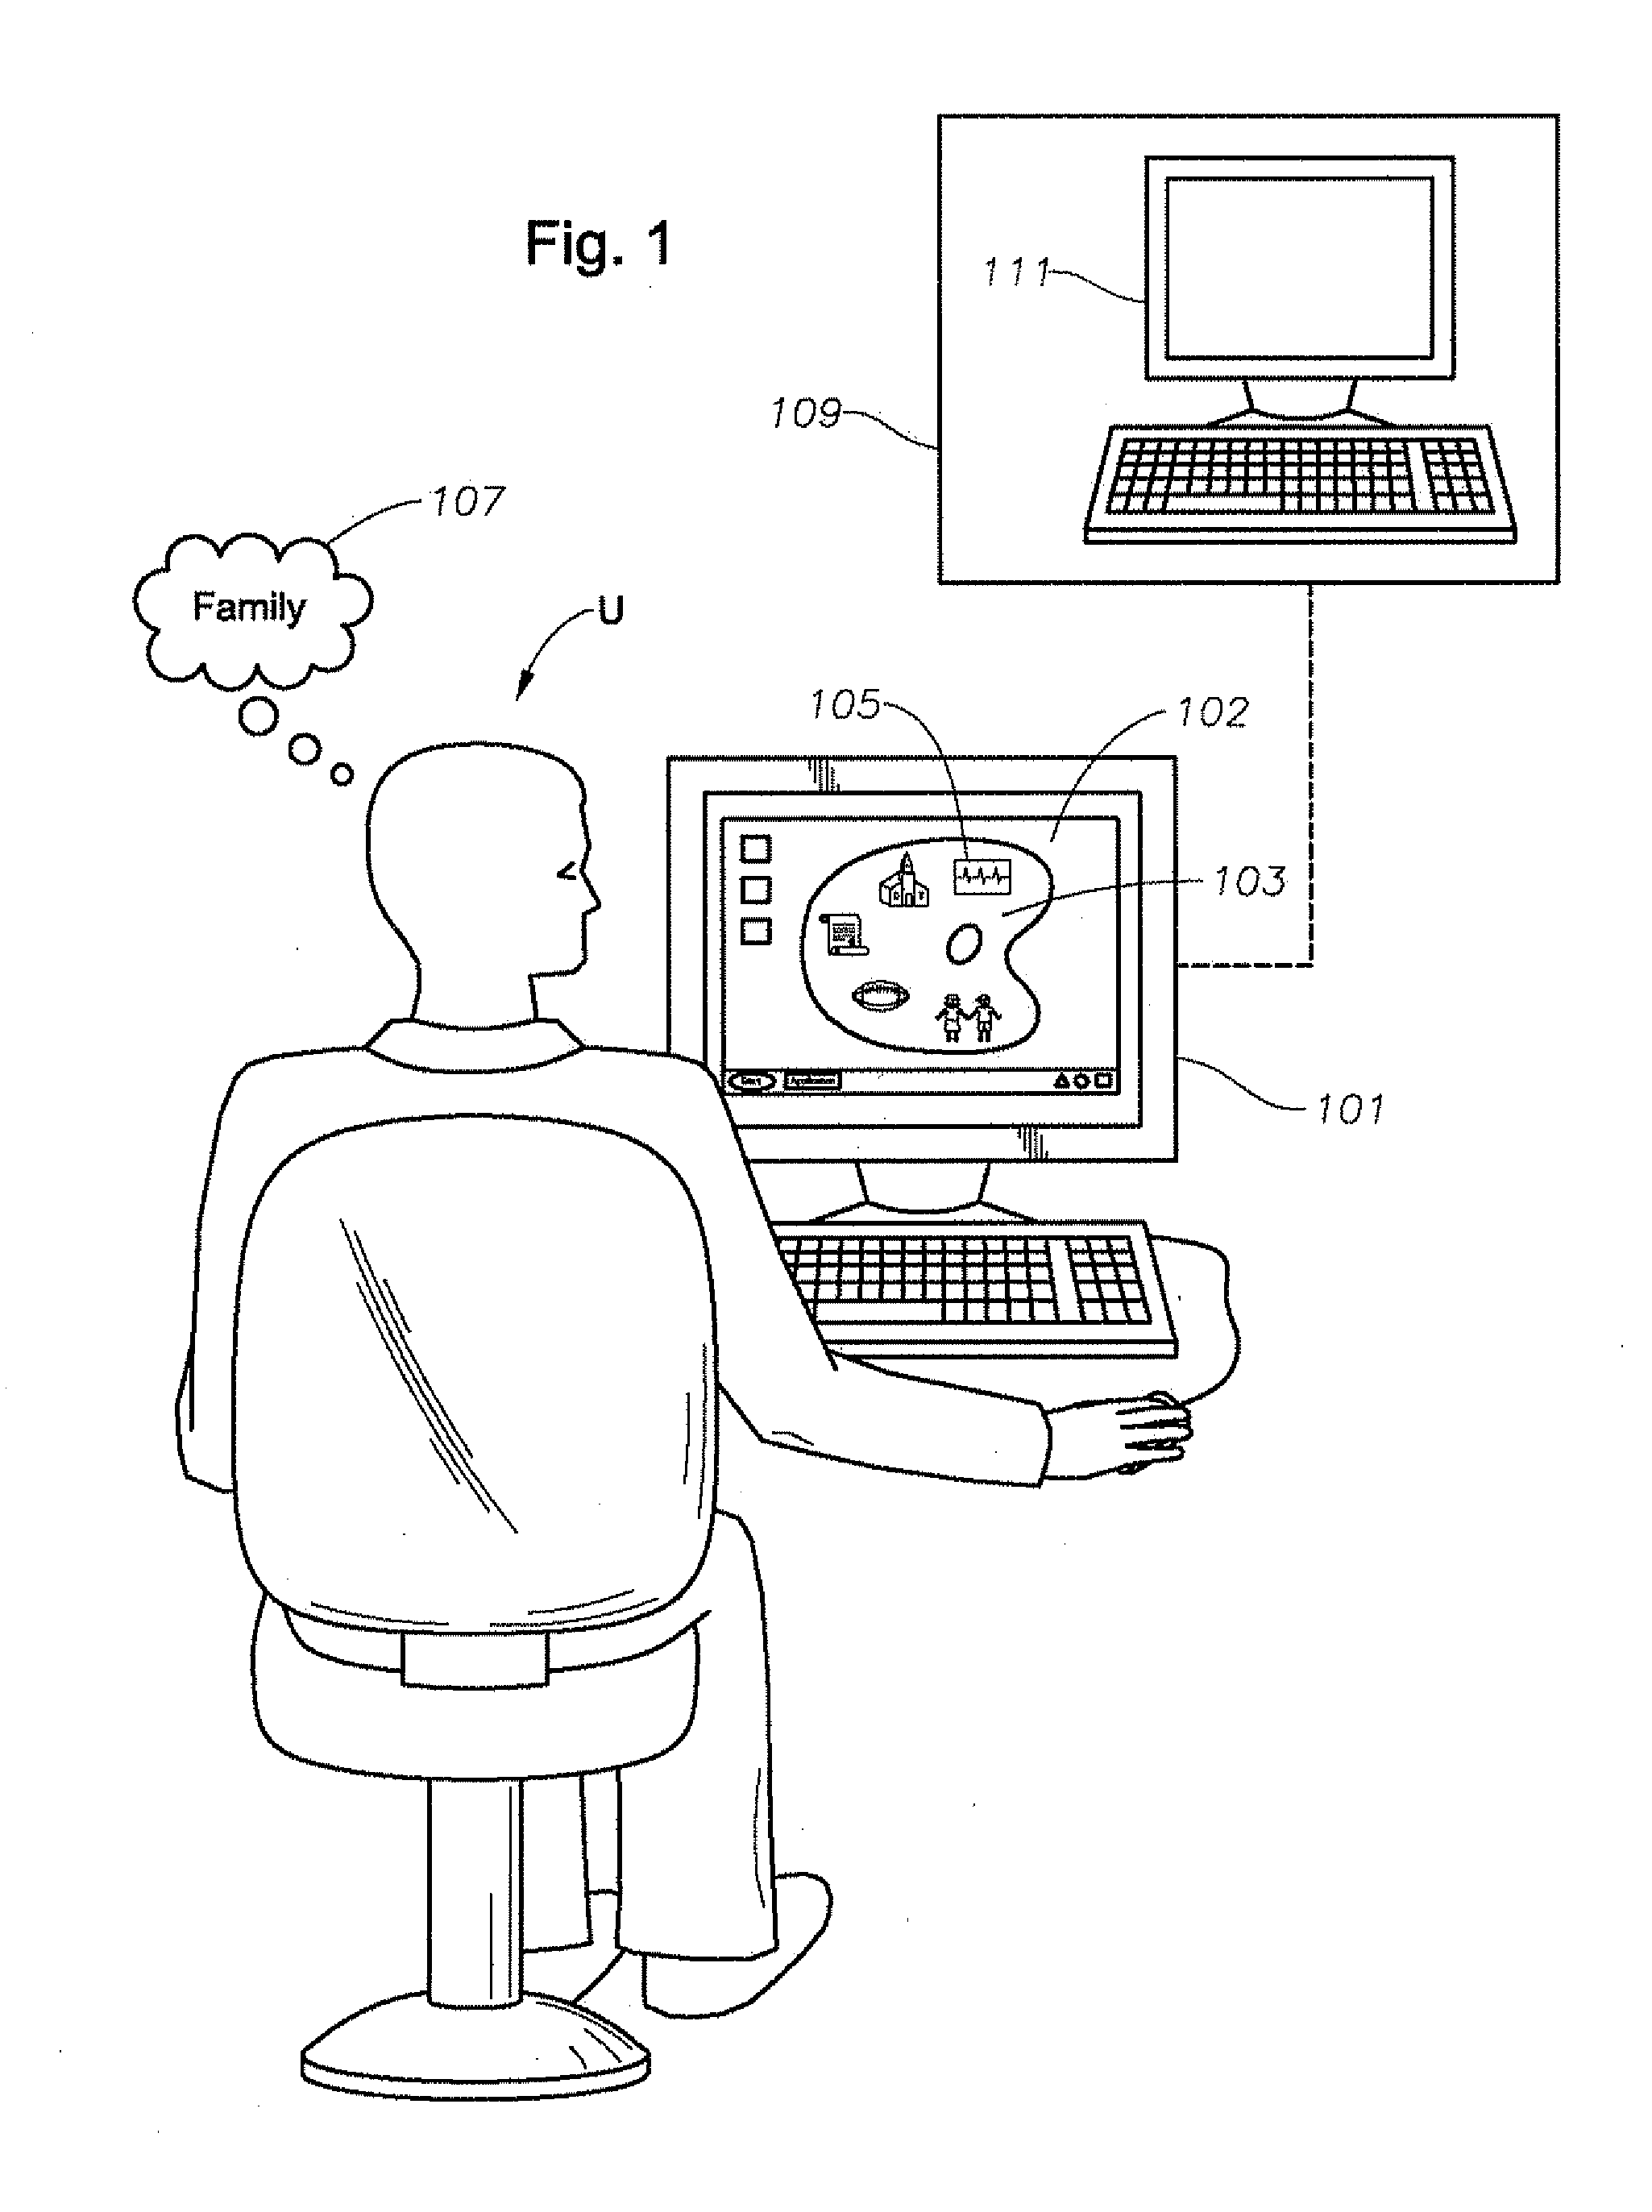 Machine, Program Product, And Computer-Implemented Method For File Management And Storage